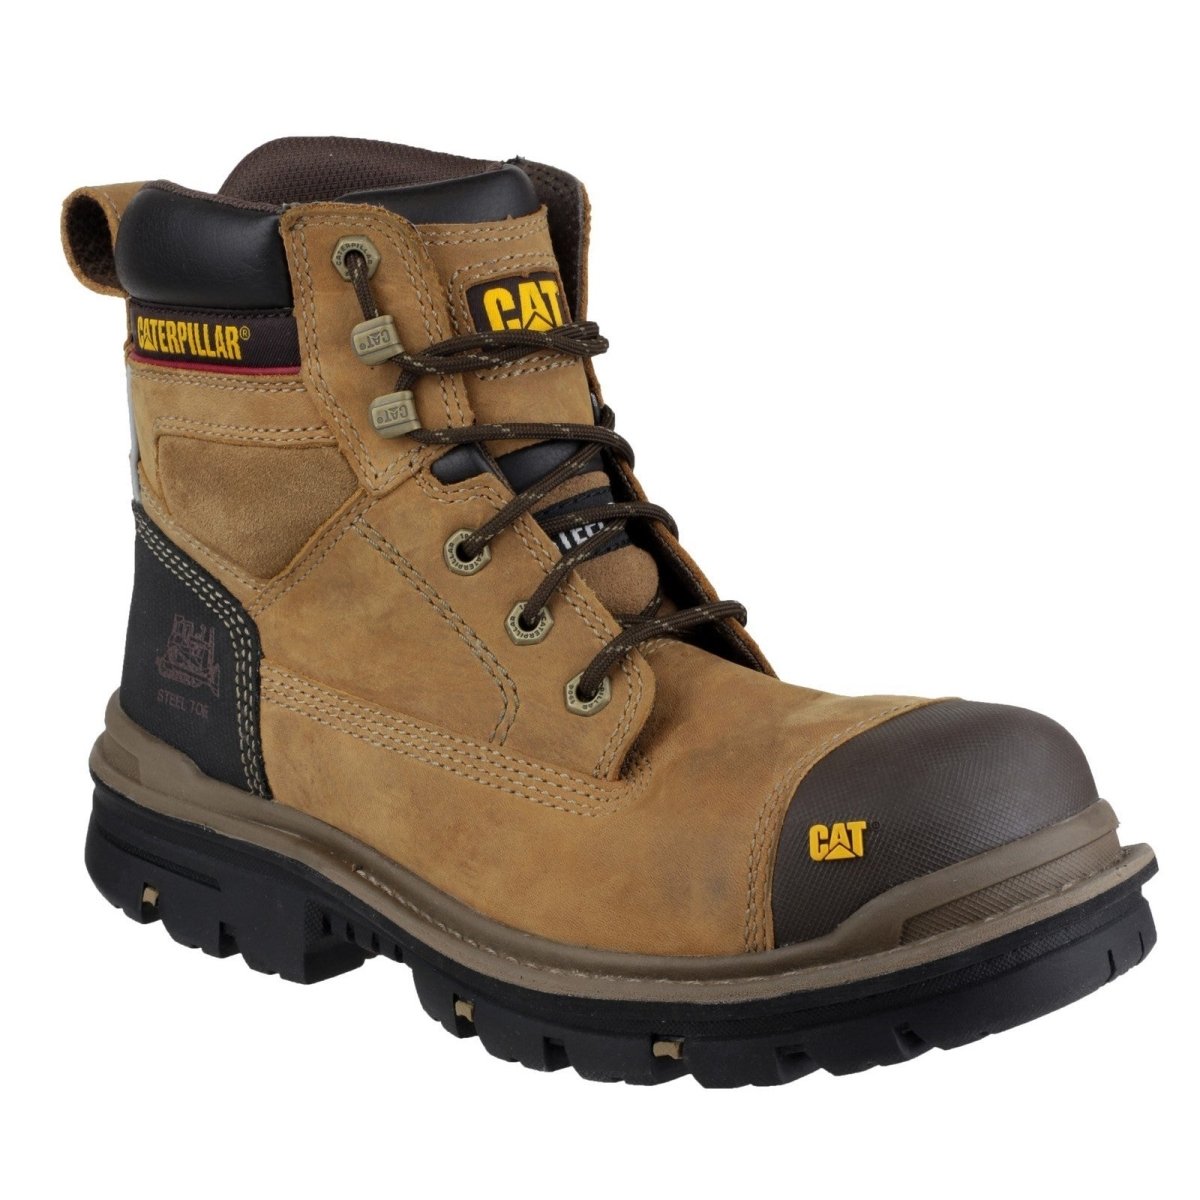 Caterpillar Gravel 6" S3 Steel Toe & Midsole Safety Boots - Shoe Store Direct